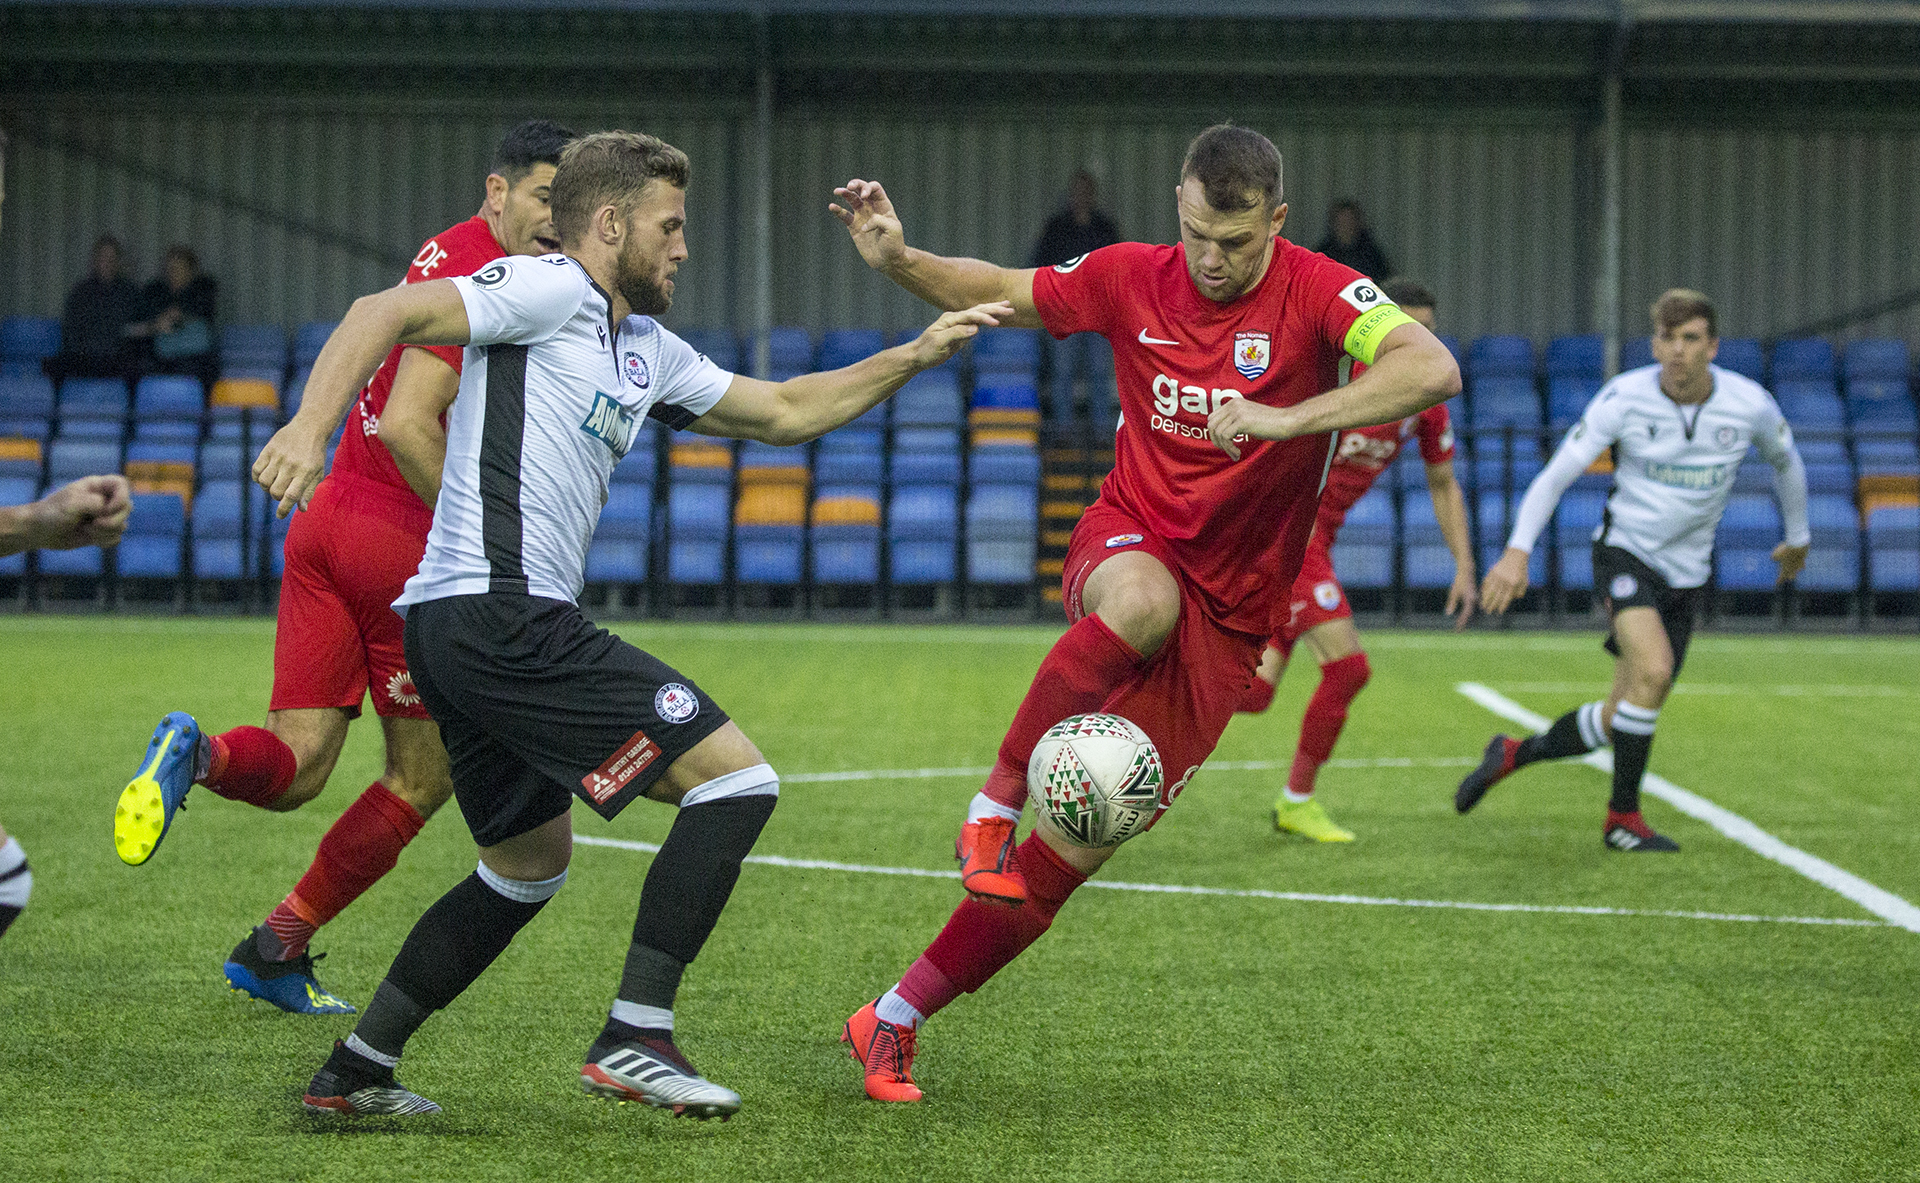 Callum Morris goes on the offensive in the first half | © NCM Media